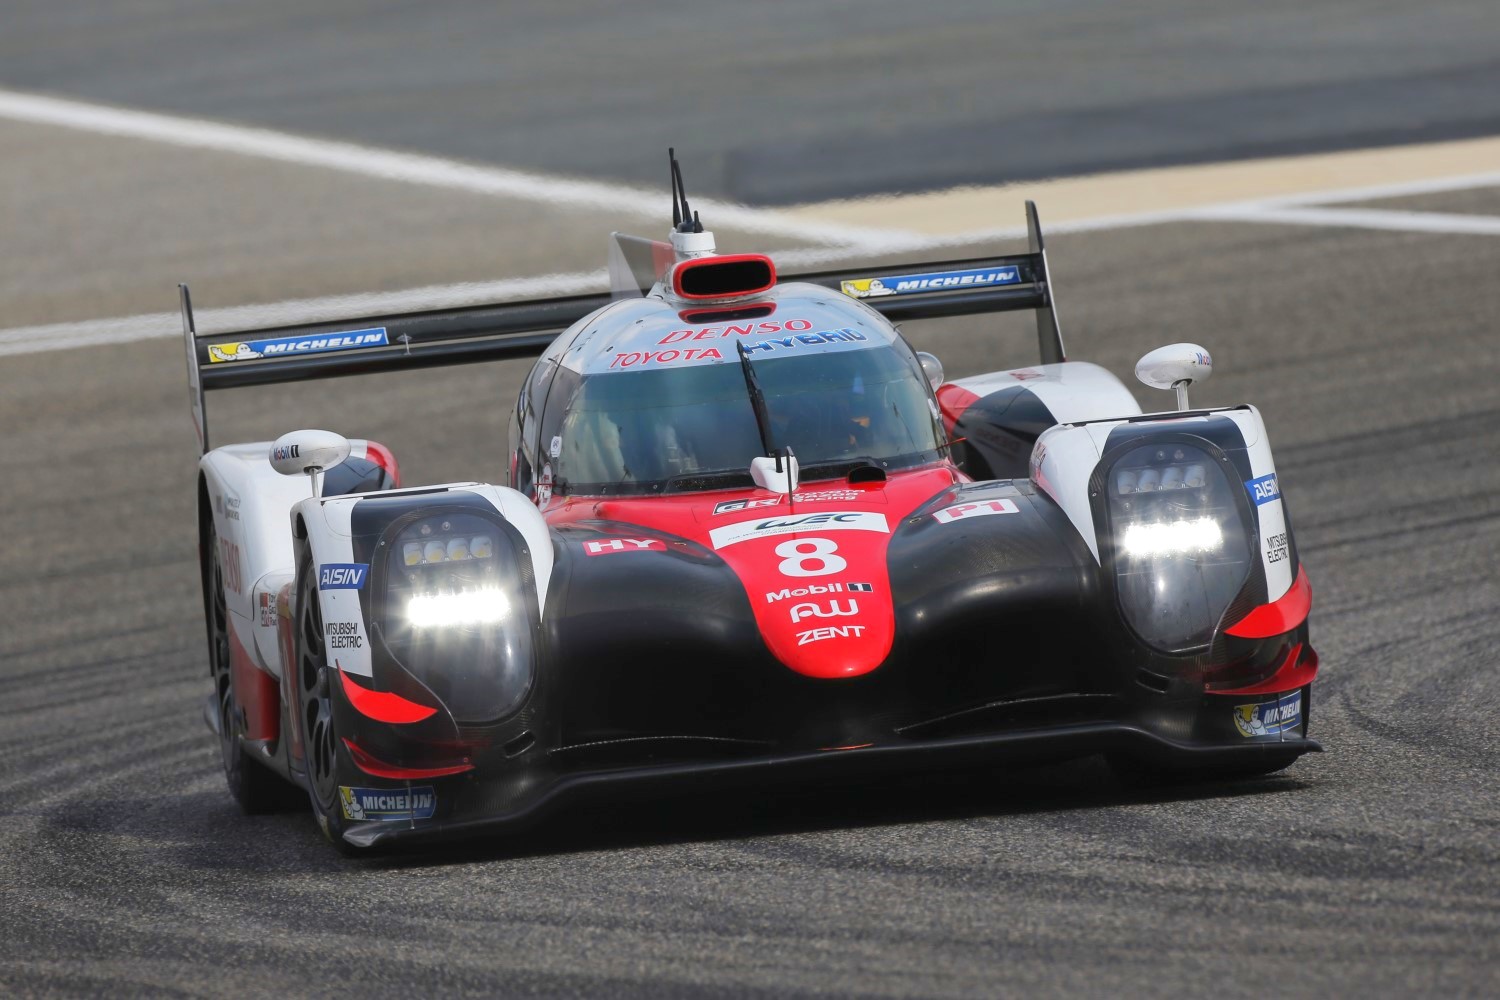 With Porsche now out of WEC Toyota is guaranteed victory at LeMans, so yes Alonso can win